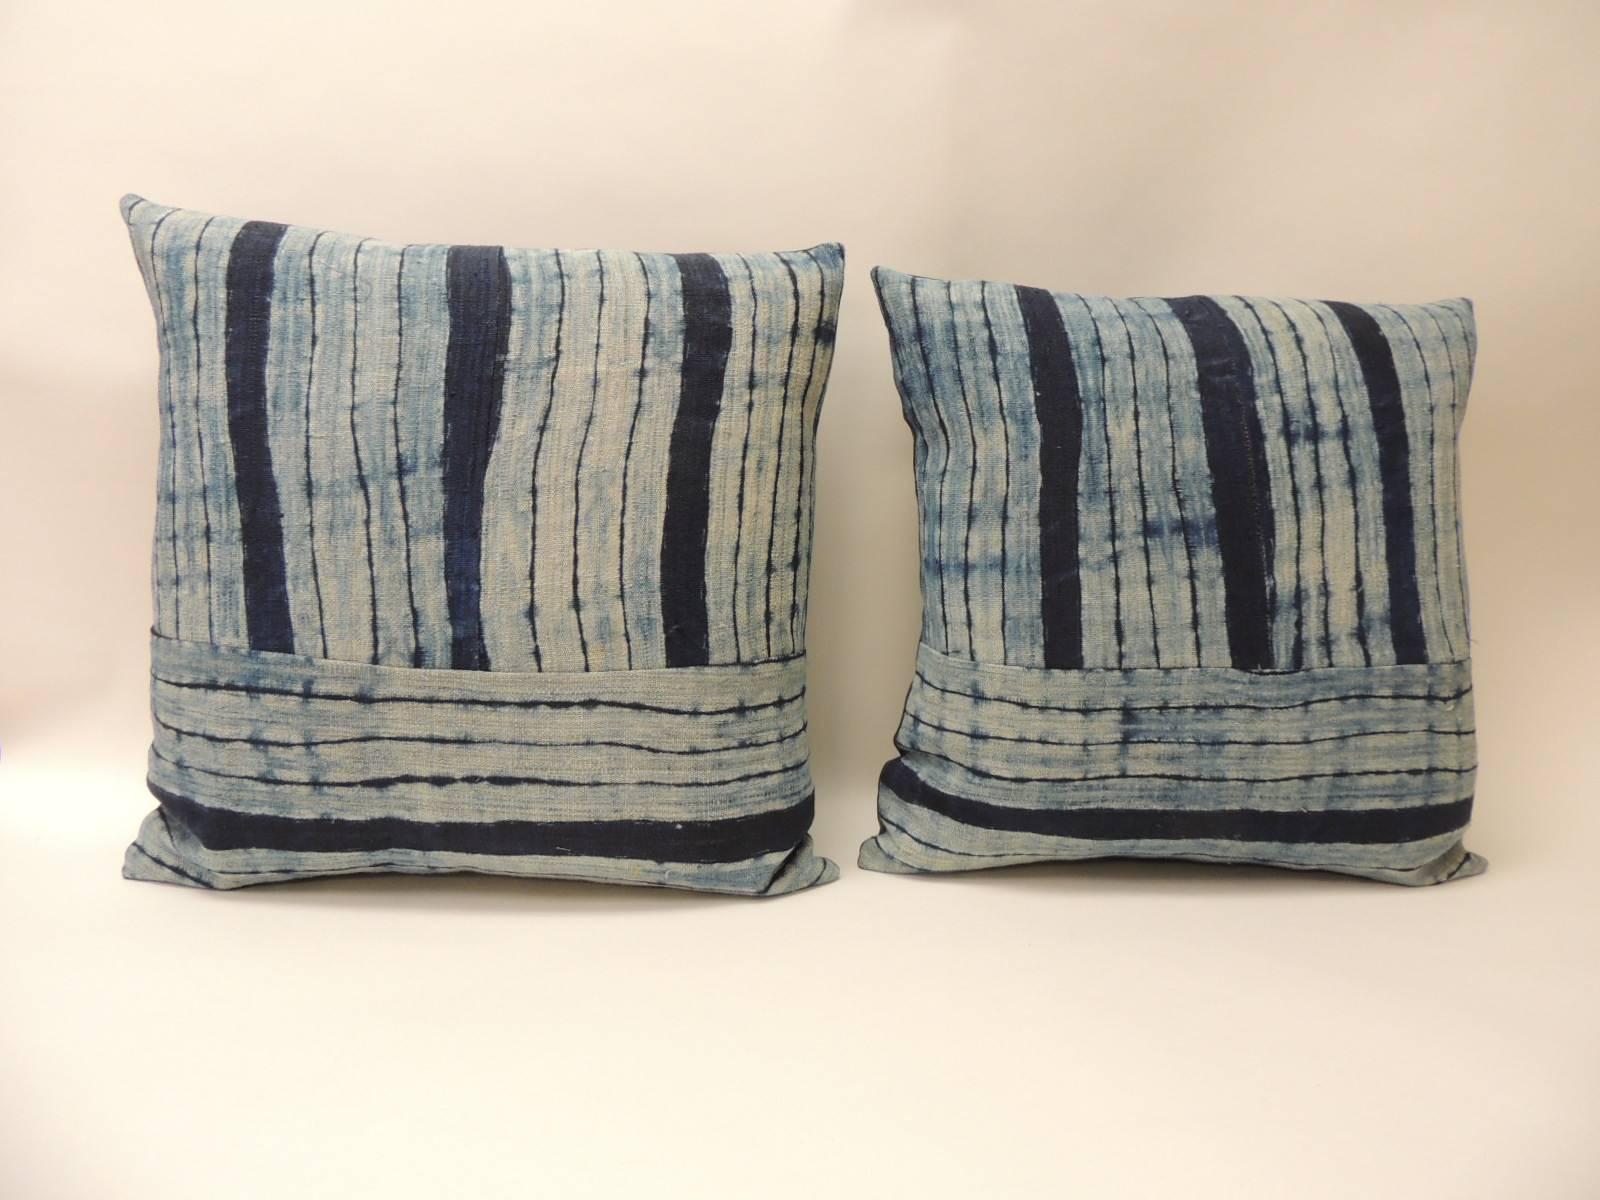 Pair of vintage Shibori stripes blue Asian decorative pillows.
Pair of square Indigo stripe homespun hemp textile with dark blue linen backings. Combination of vertical and horizontal stripes to create this unique pattern,
Decorative bolster